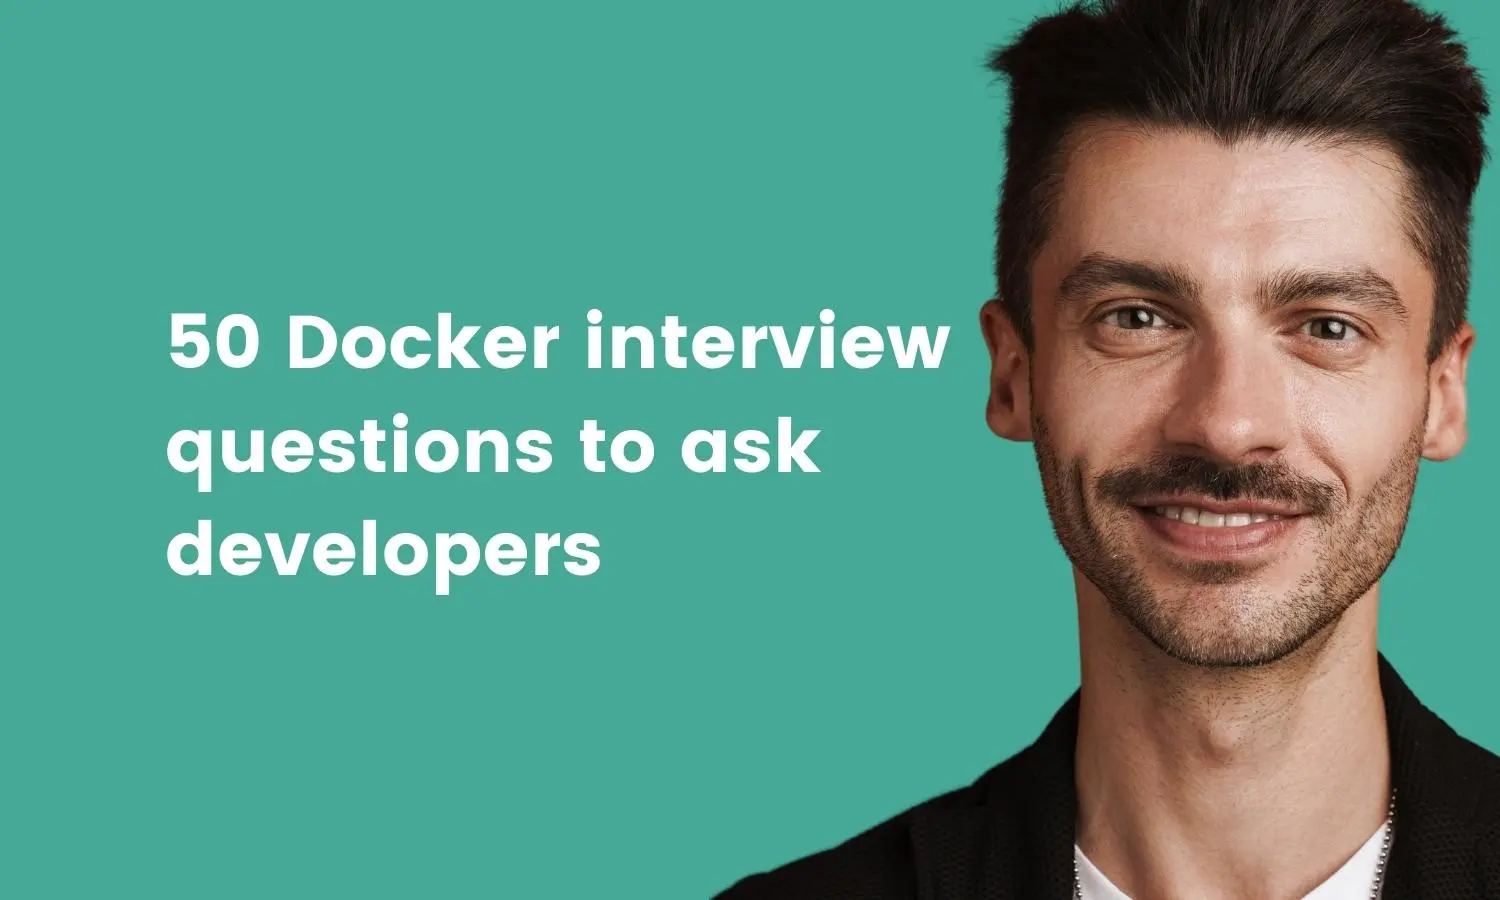 50_Docker_interview_questions_to_ask_developers